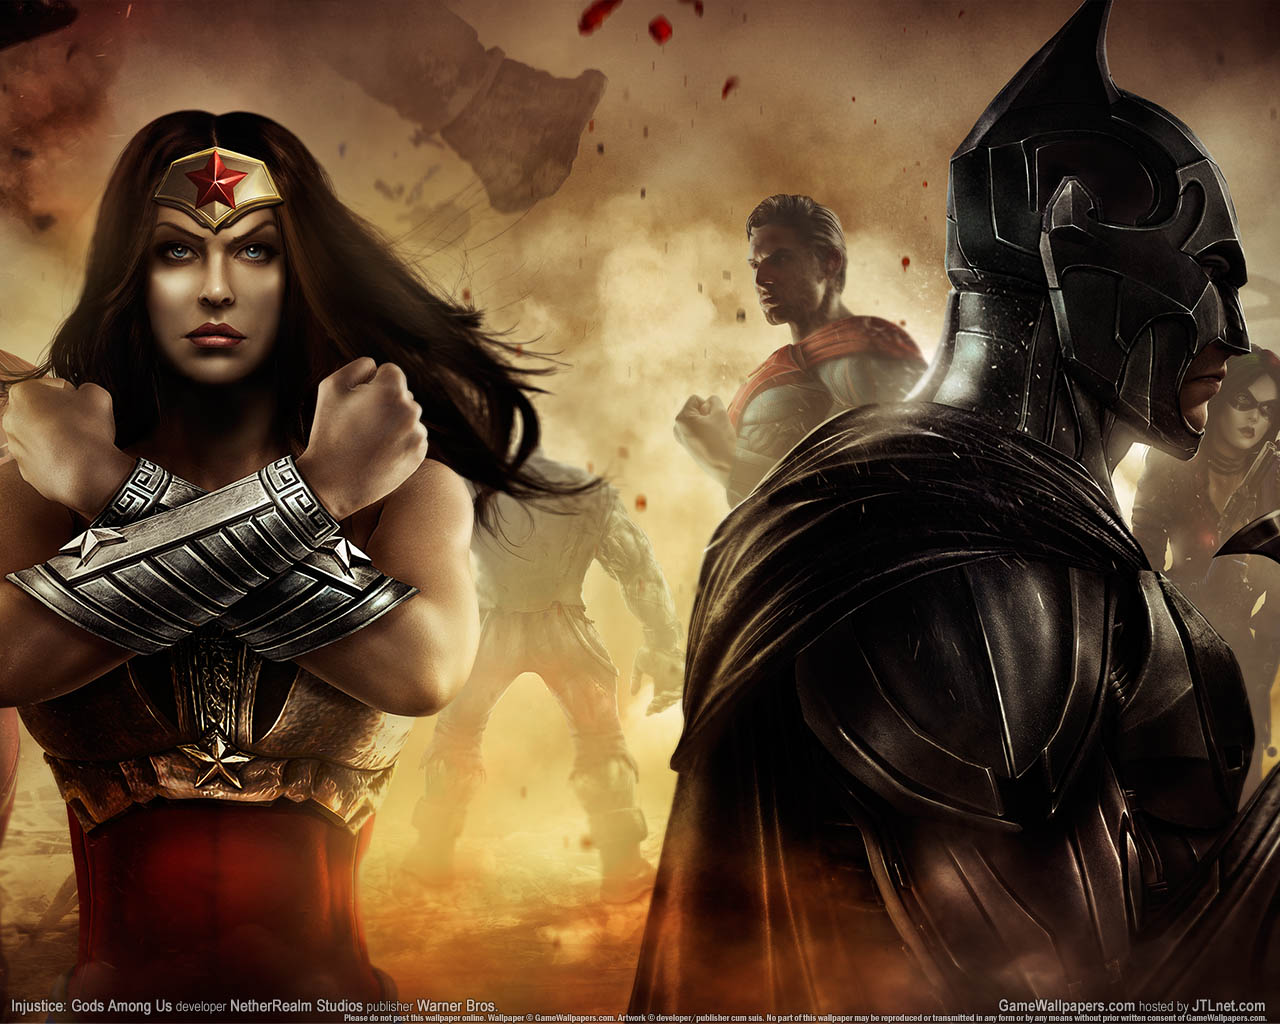 Injustice%3A Gods Among Us achtergrond 01 1280x1024